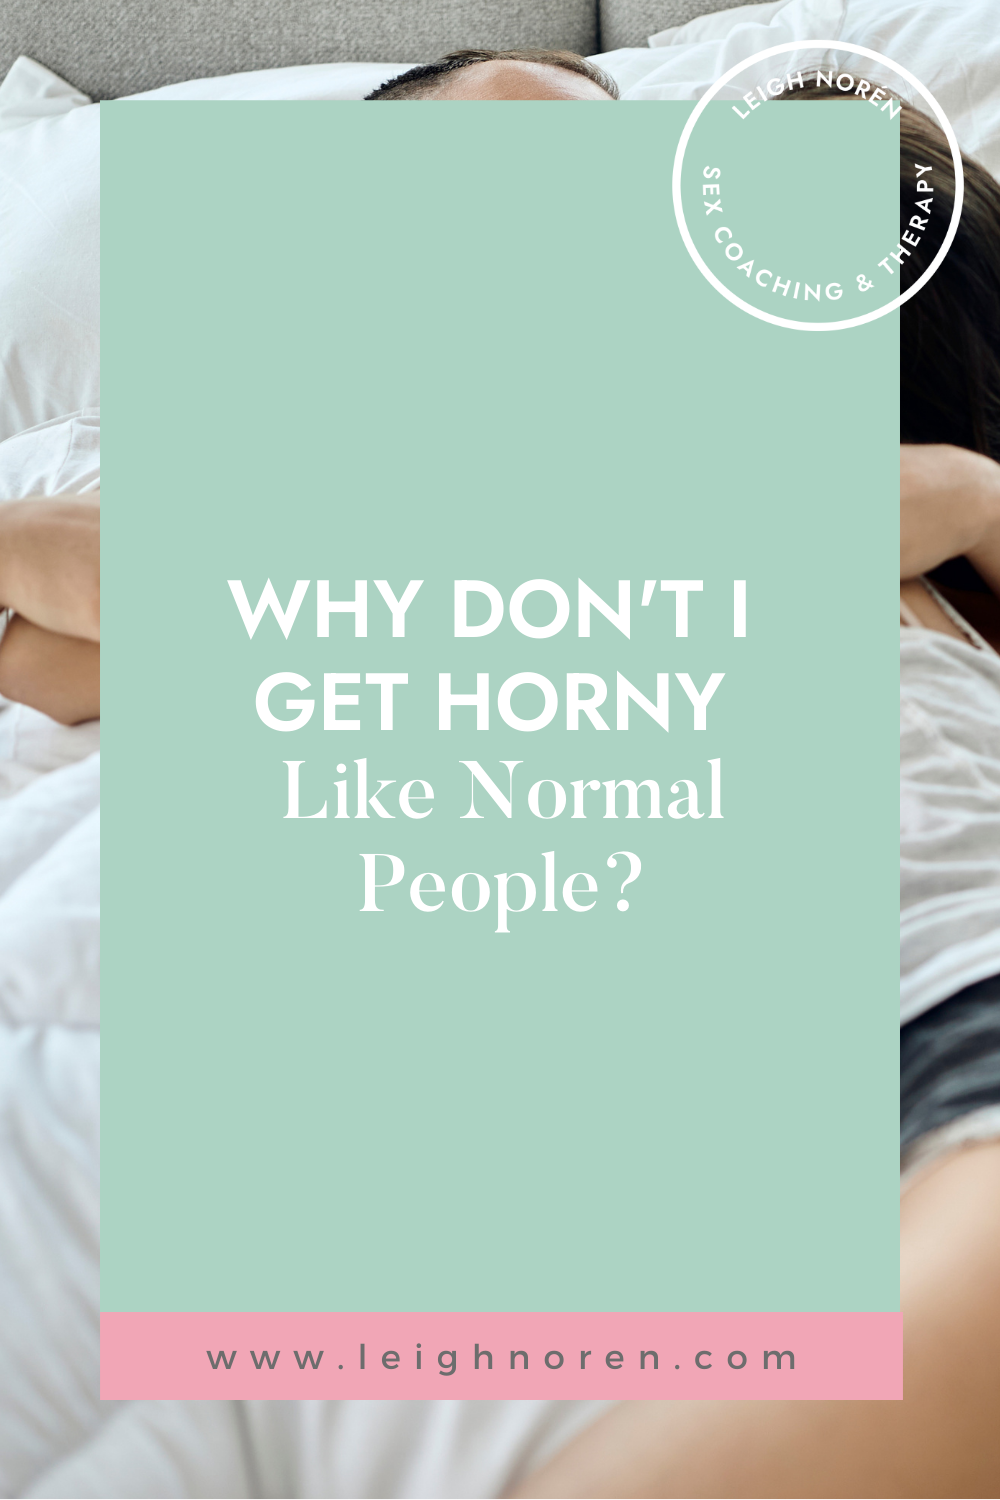 Why Don't I Get Horny Like Normal People?